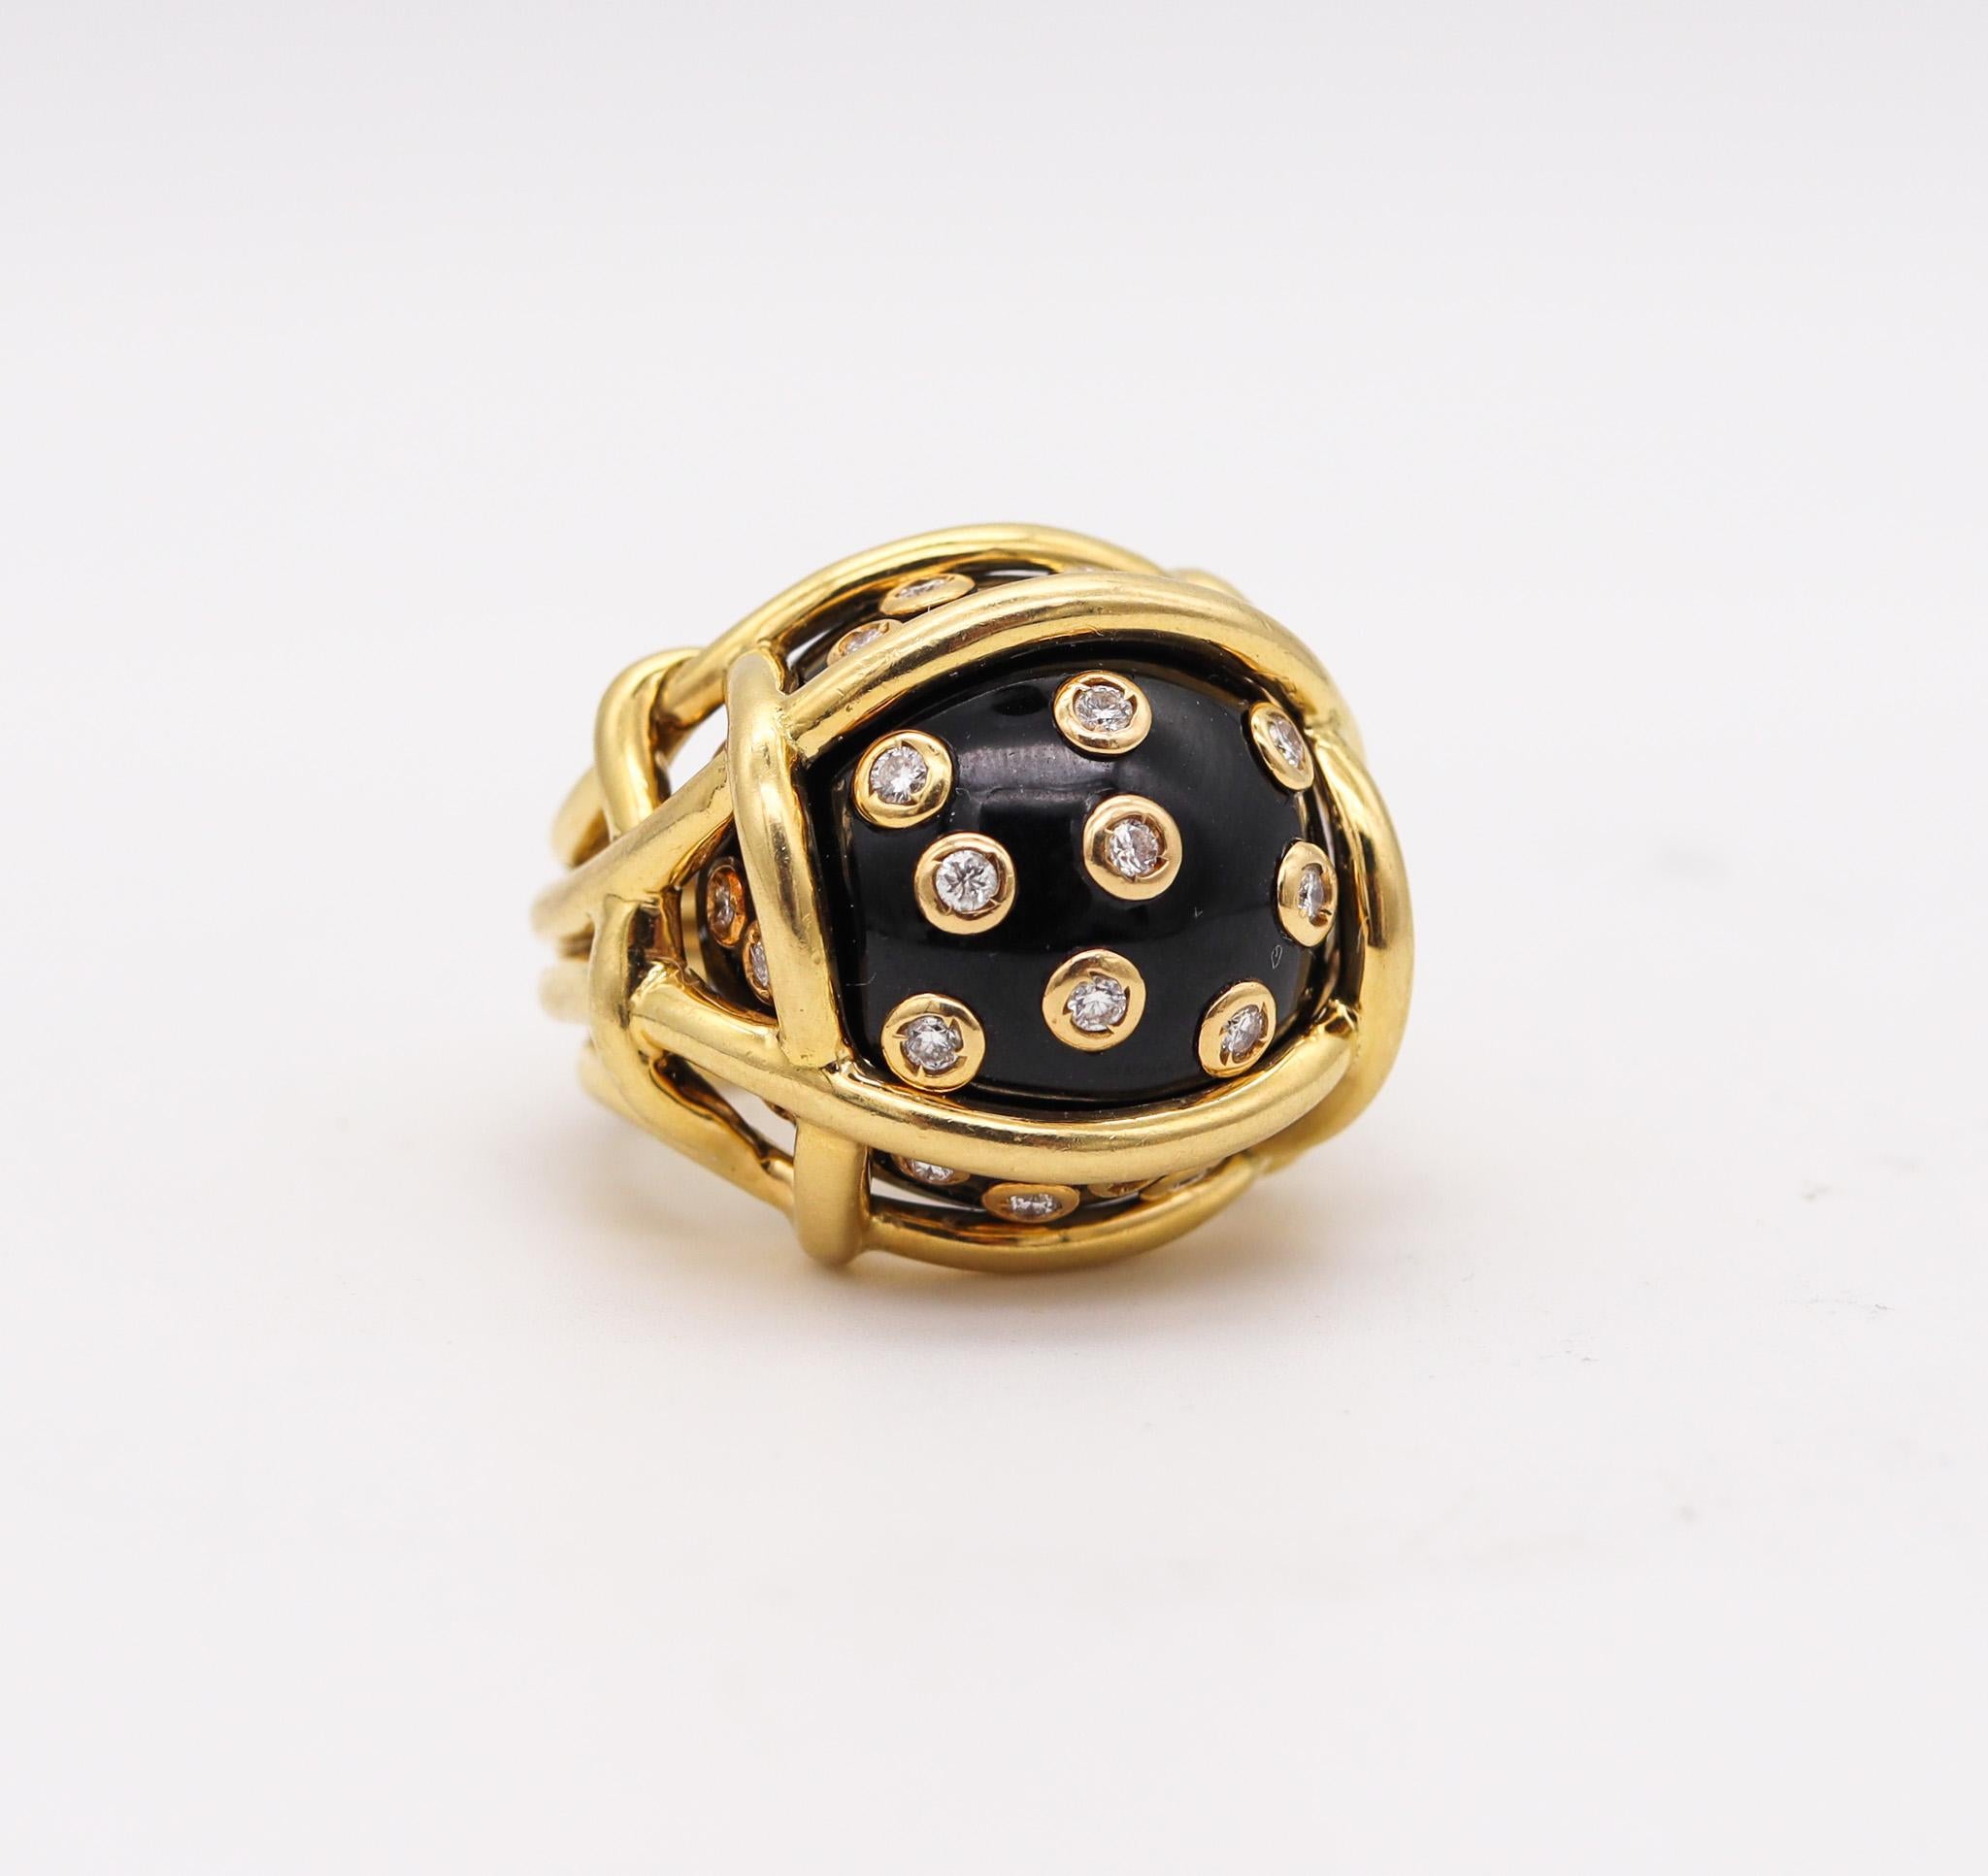 Polka dots cocktail Ring designed by Verdura.

Beautiful and iconic polka dot ring, created in Milano Italy by the jewelry house of Verdura. This cocktail ring has been crafted in the shape of a wired nest in solid yellow gold of 18 karats with high